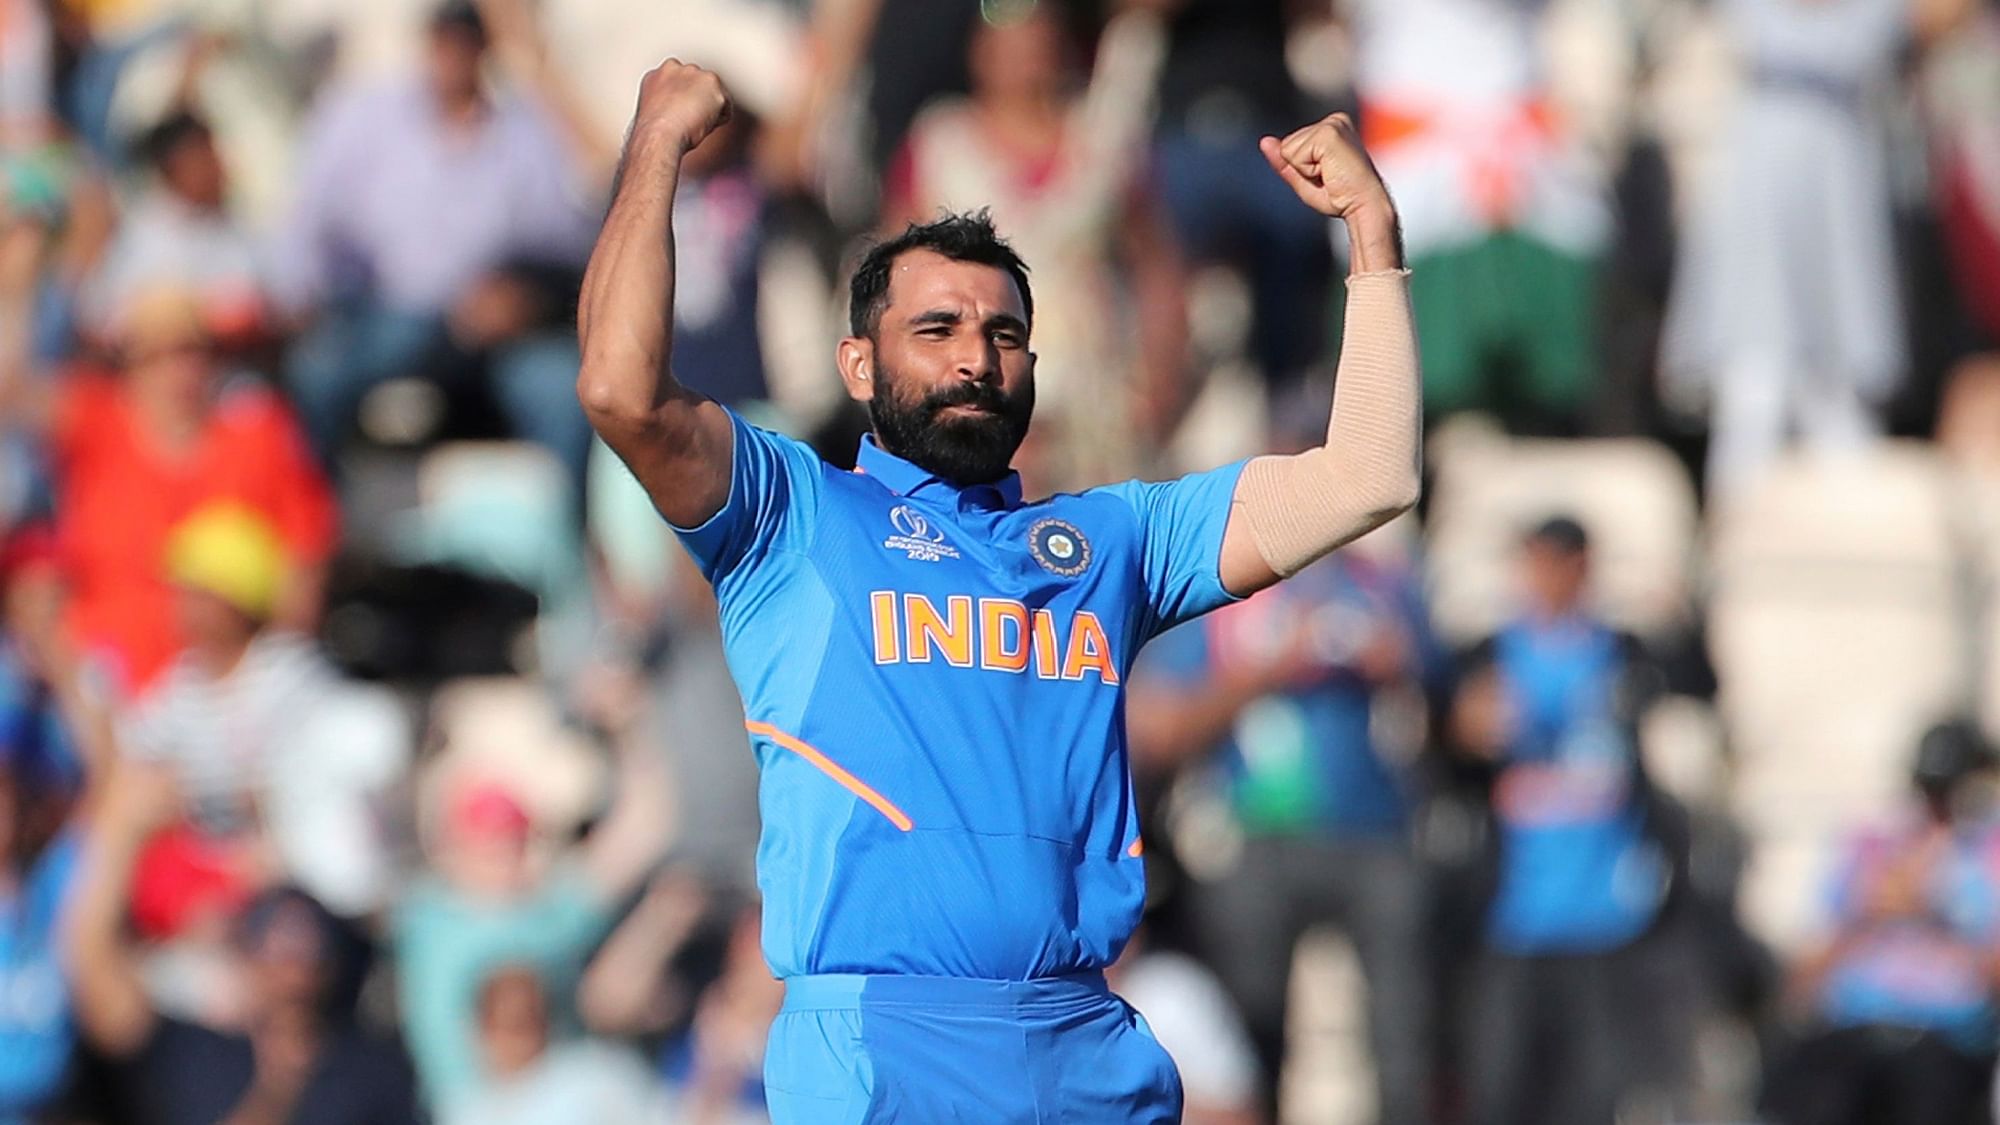 Shami is the second Indian bowler to take a hat-trick in World Cup after Chetan Sharma.